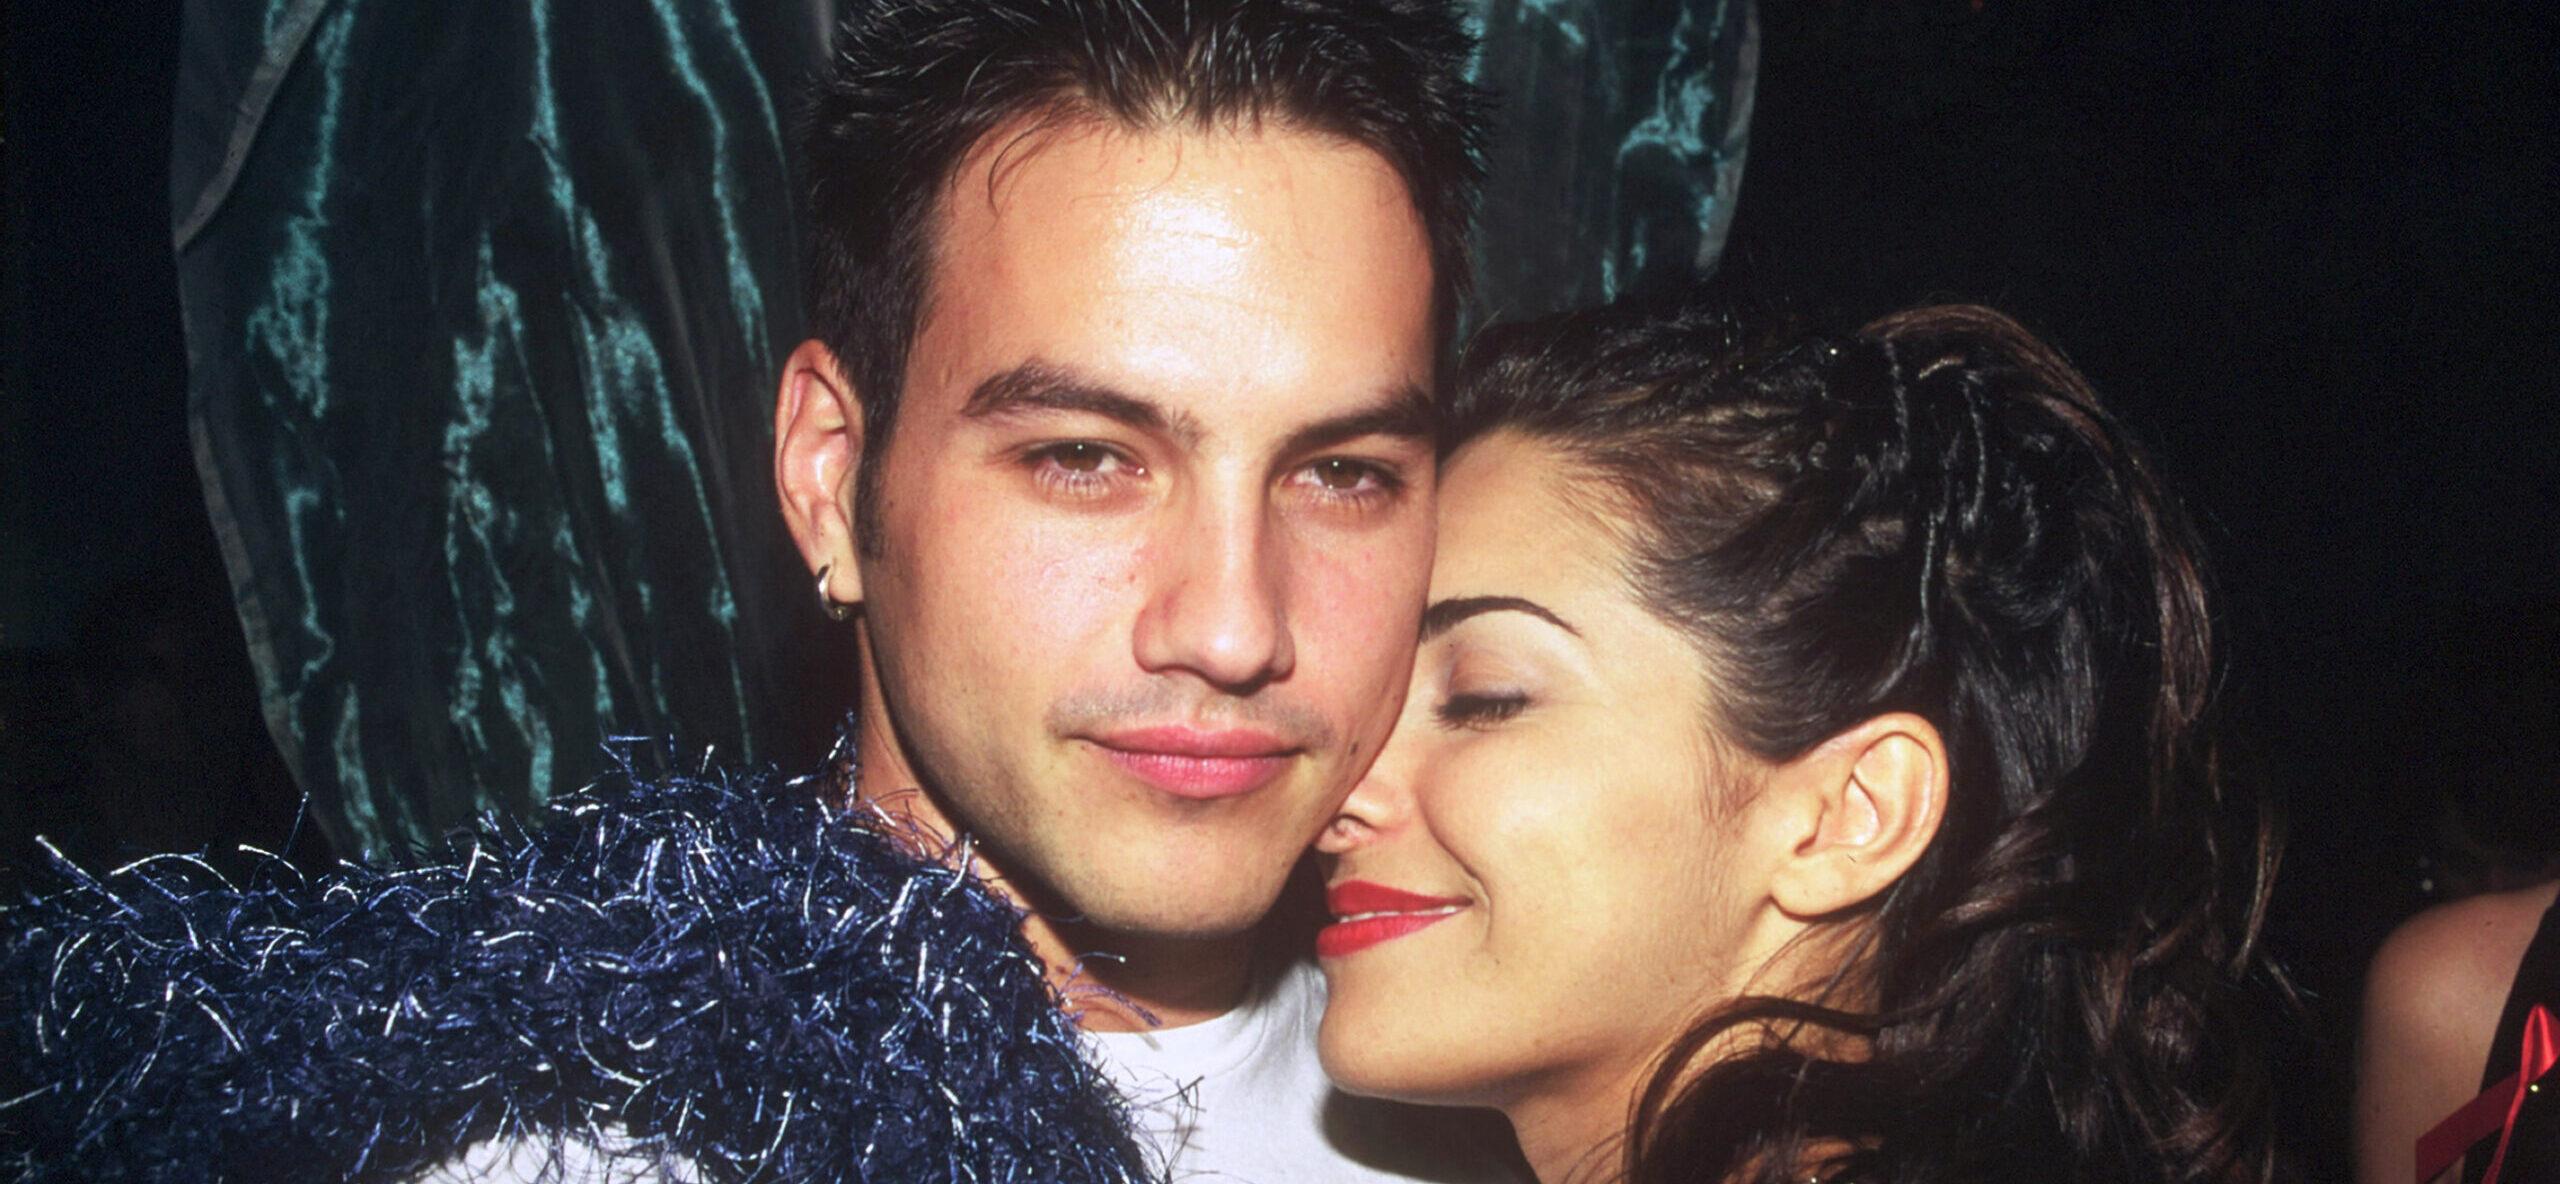 Vanessa Marcil Pays Tribute To Ex-Fiancé Tyler Christopher: ‘Rest In Power’